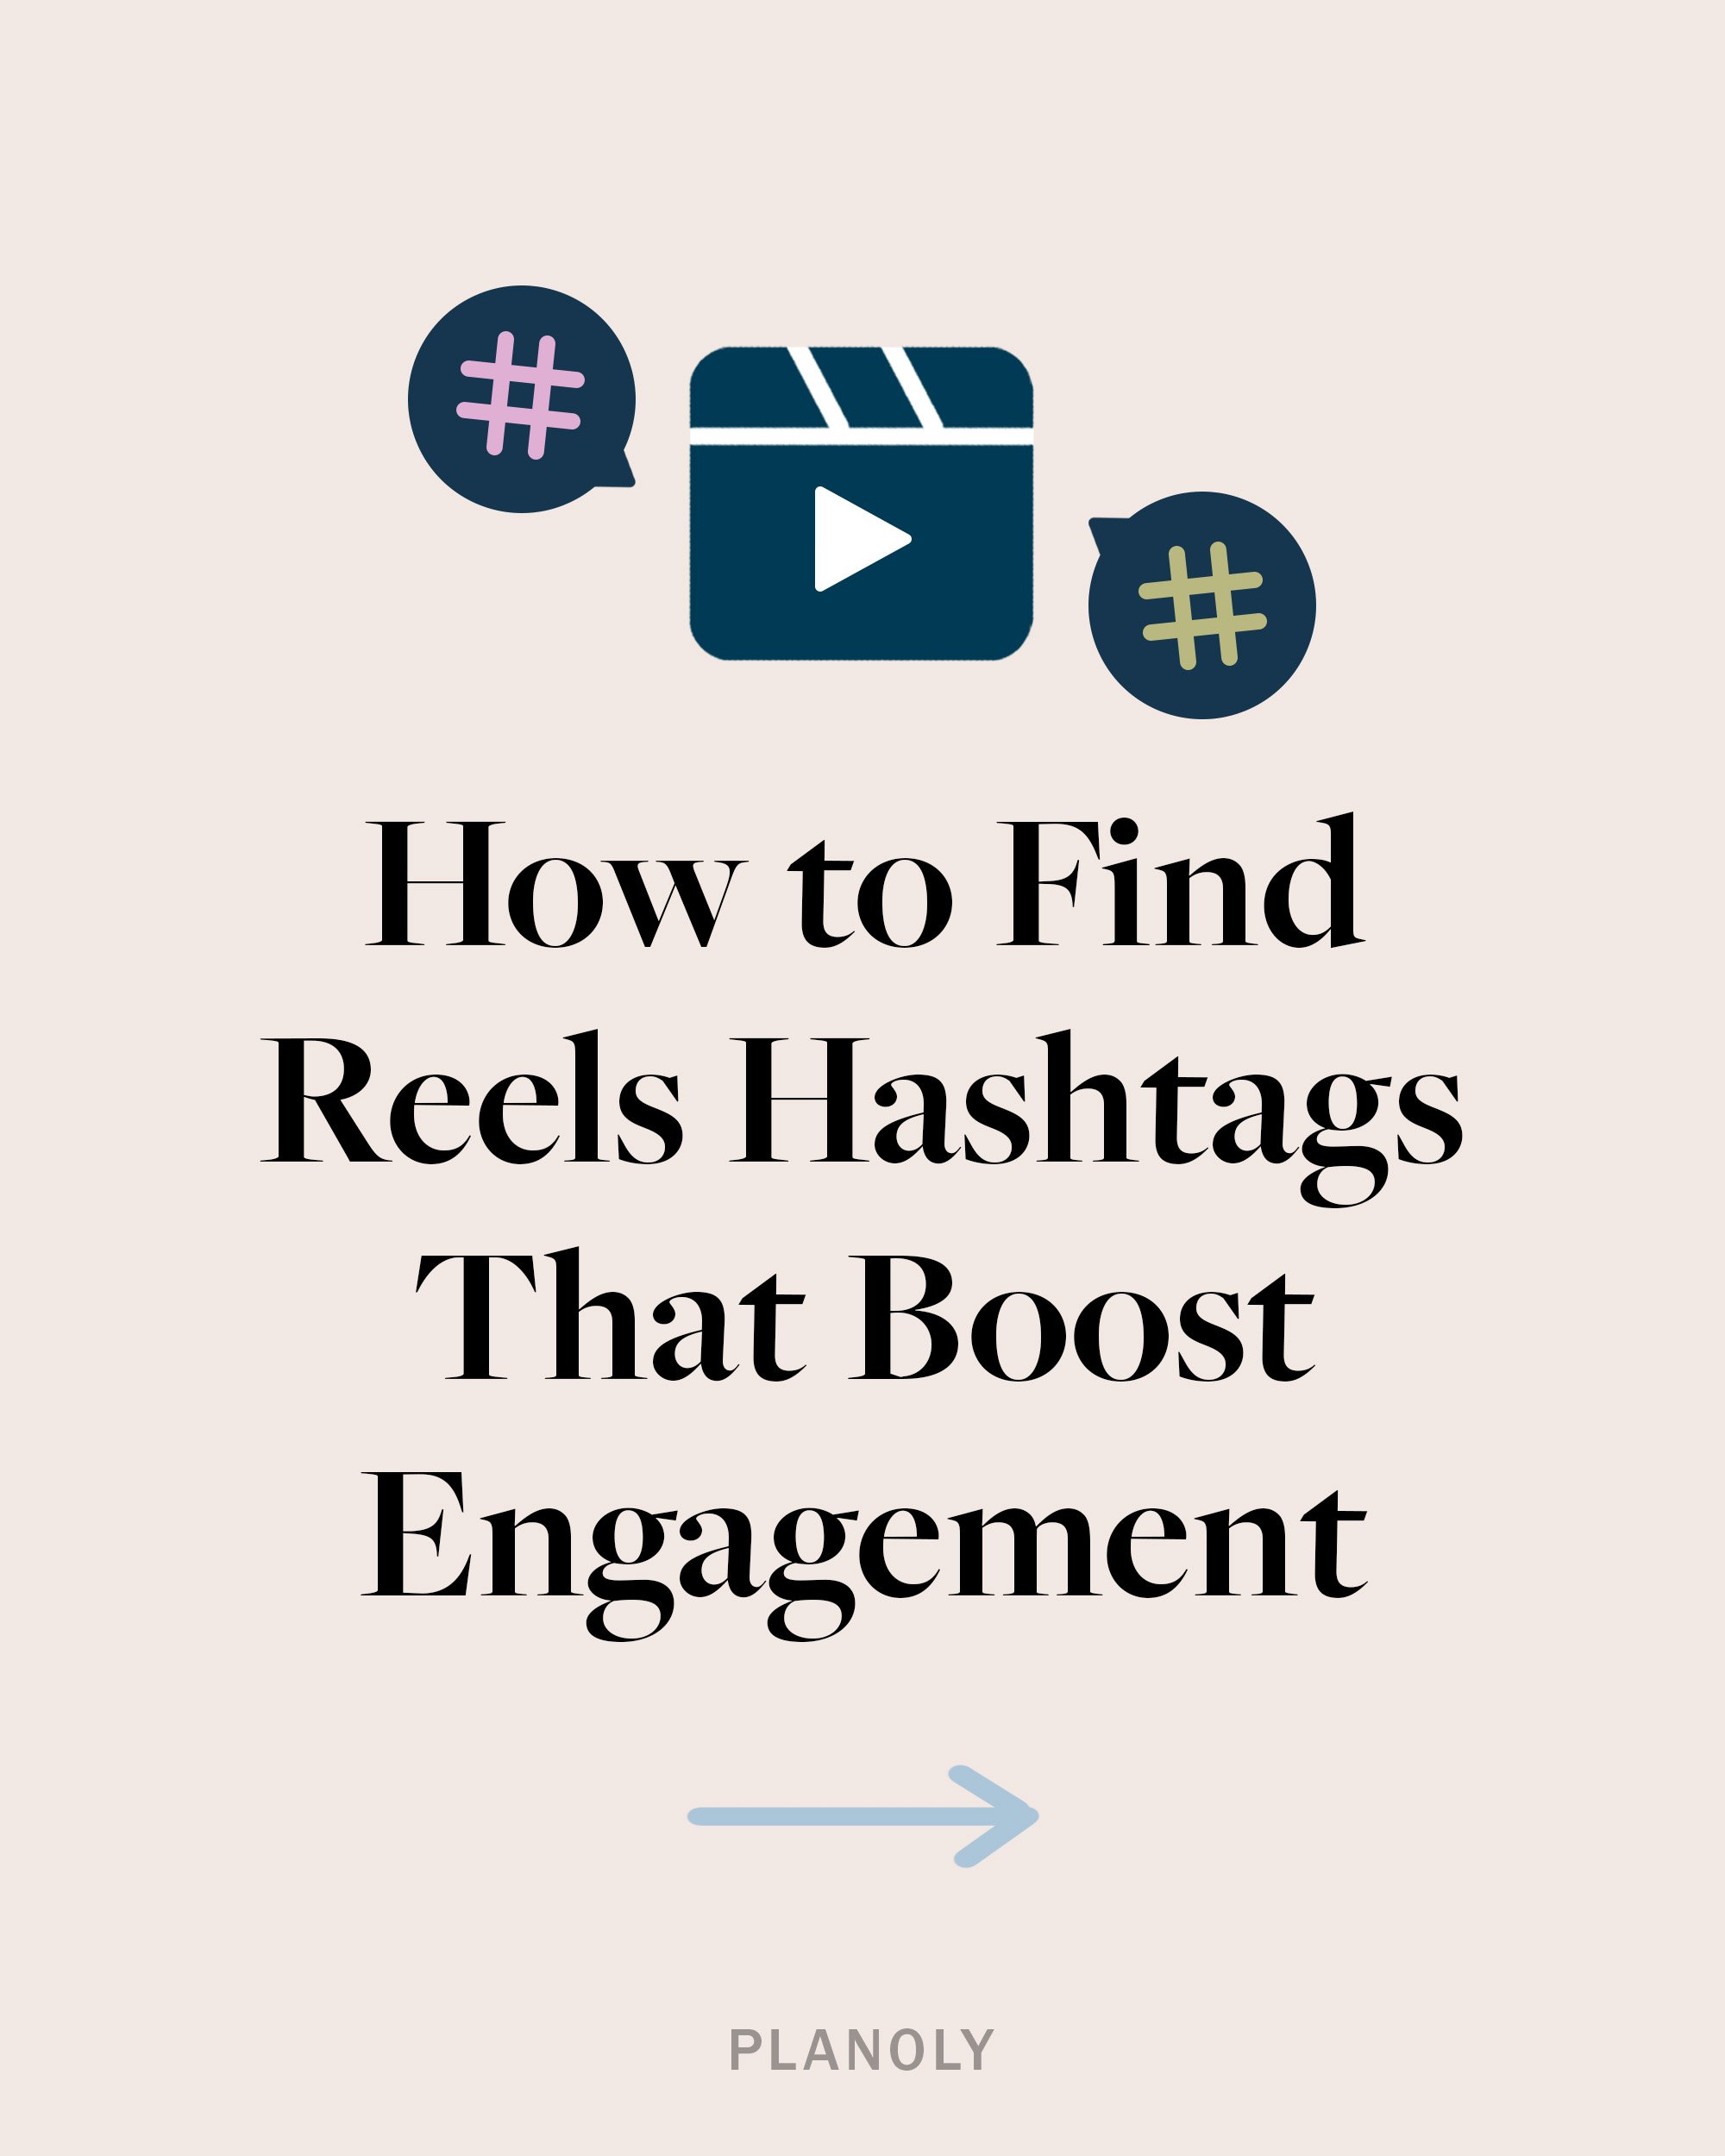 PLANOLY - IG Feed - How to Use Instagram Reels Hashtags for Engagement - 1.jpg